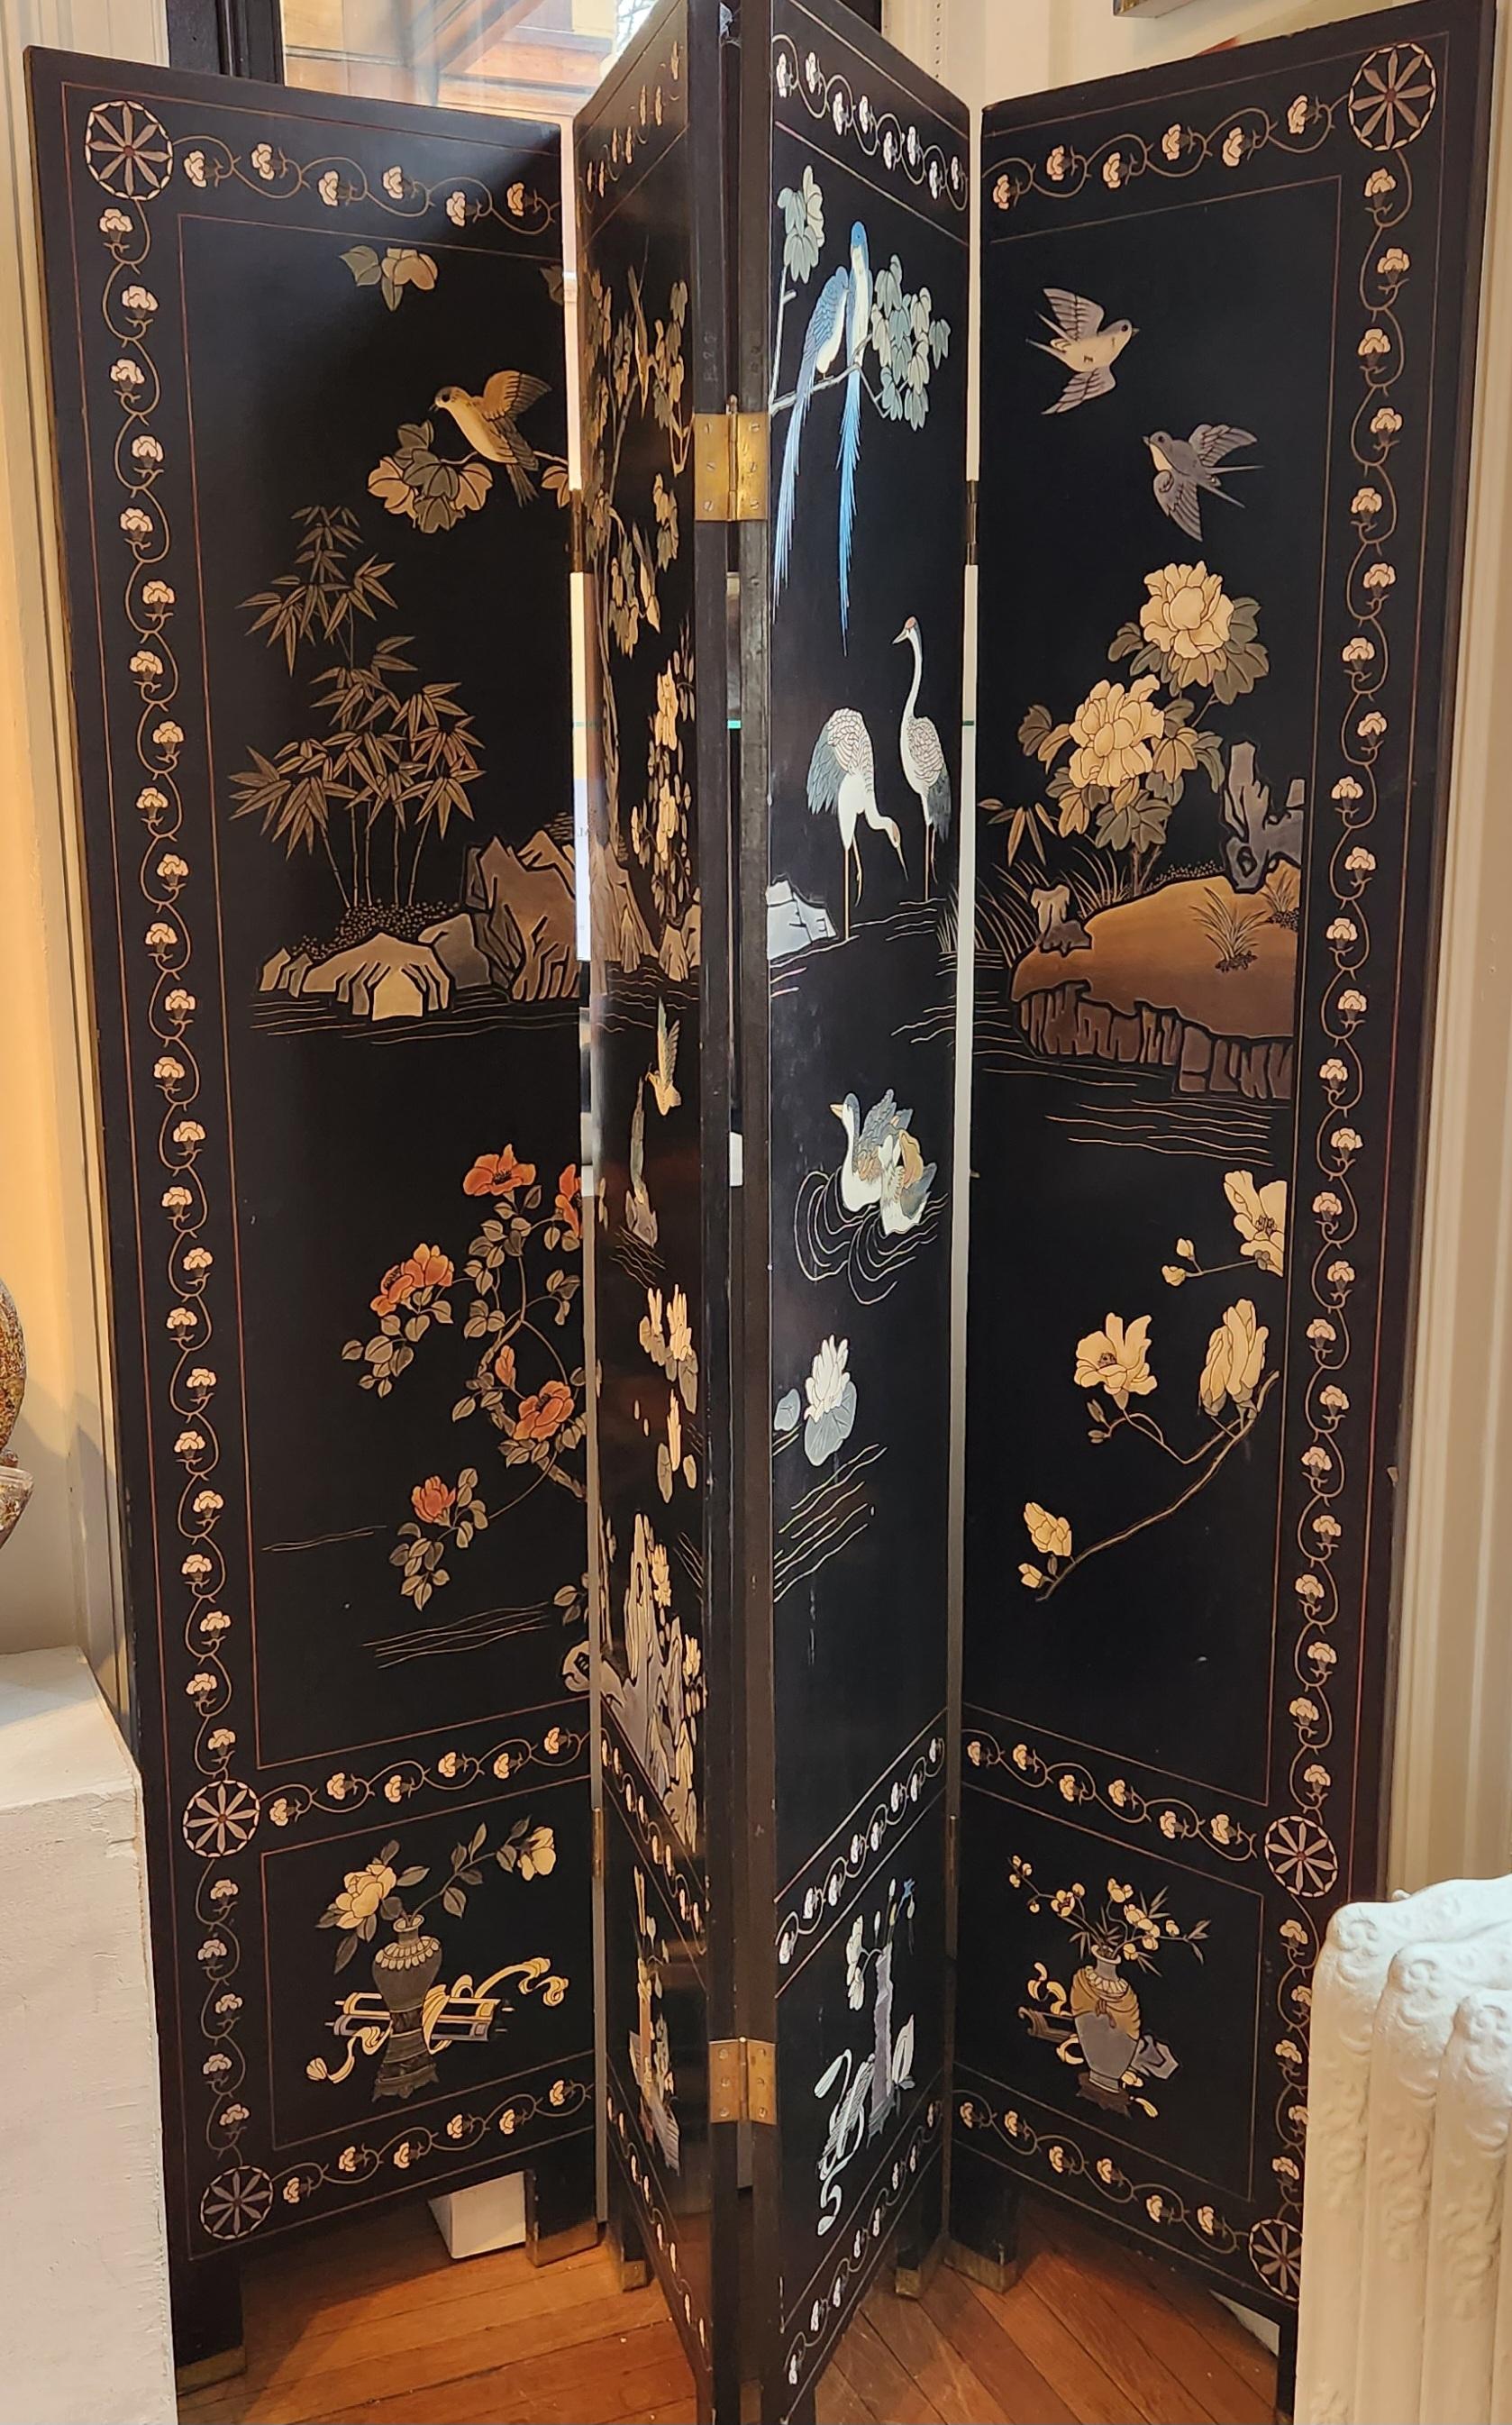 This 20th century lacquered Chinese screen is a wonderful example of hand carved work. There are three panels each with beautifully illustrated scenes of flora and fauna. The panels are lined with rows of white flower engravings that separate